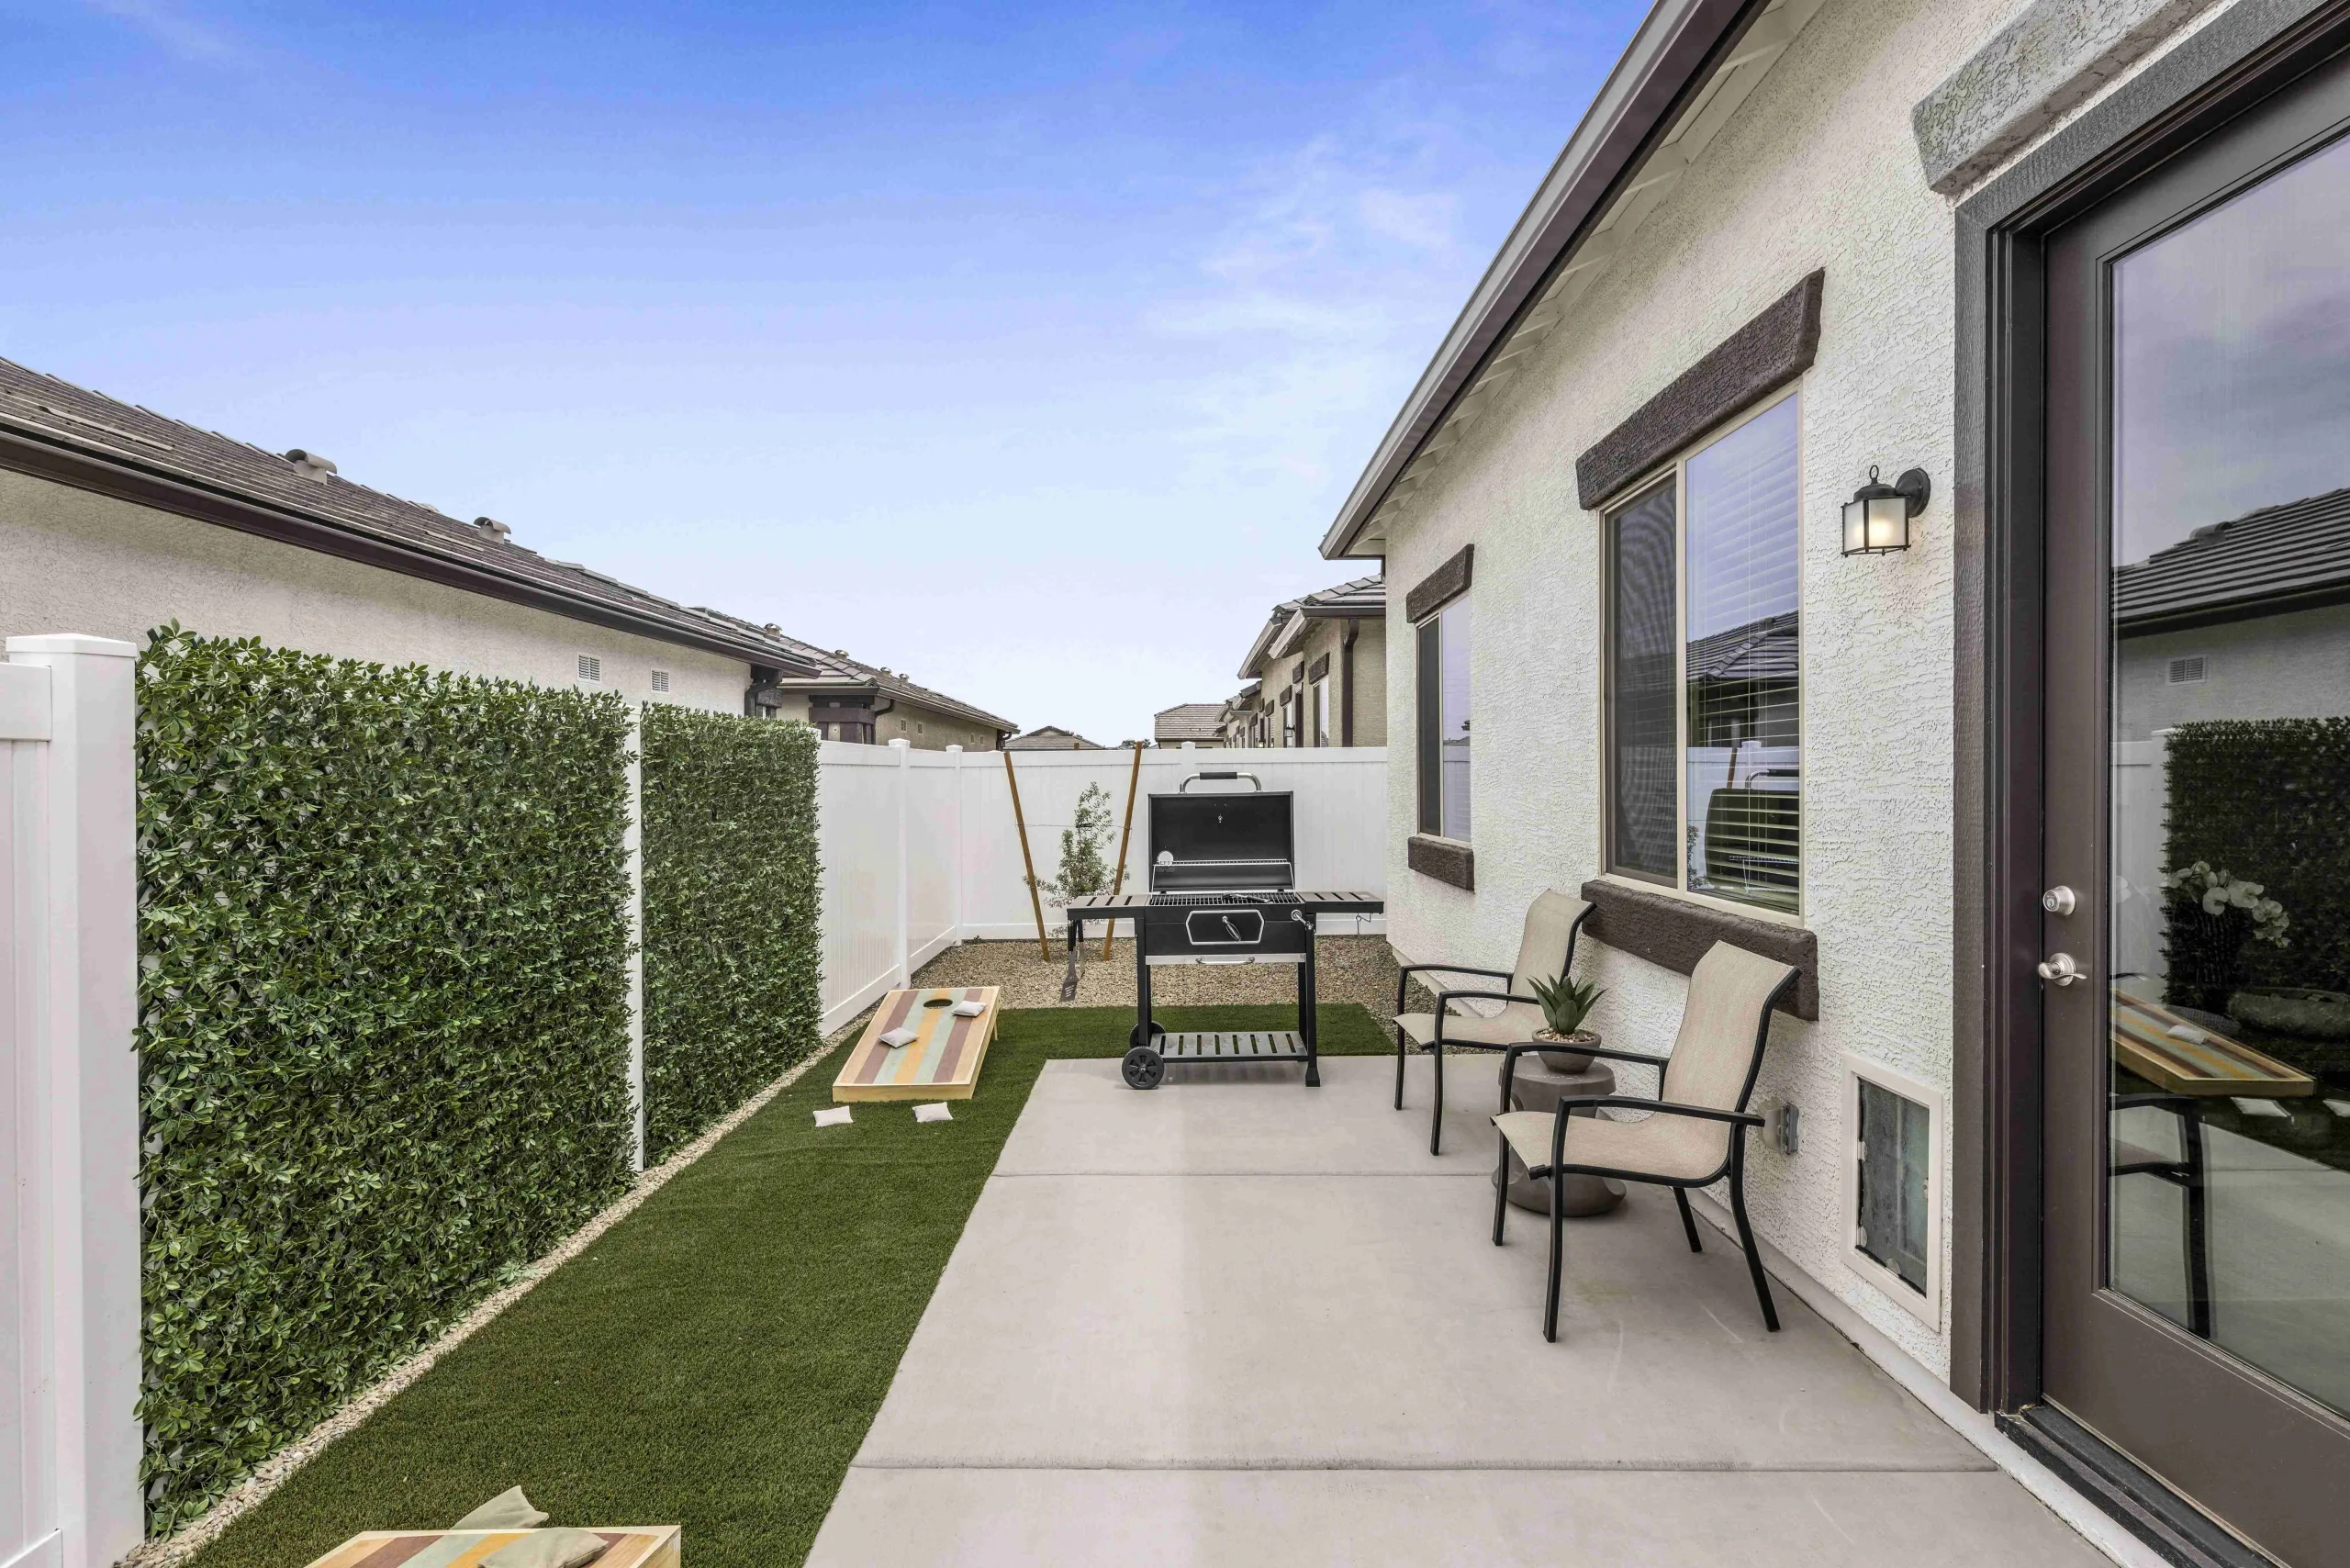 Backyard with seating, side table, BBQ, and cornhole with turf, gravel, a planted tree and cement patio.